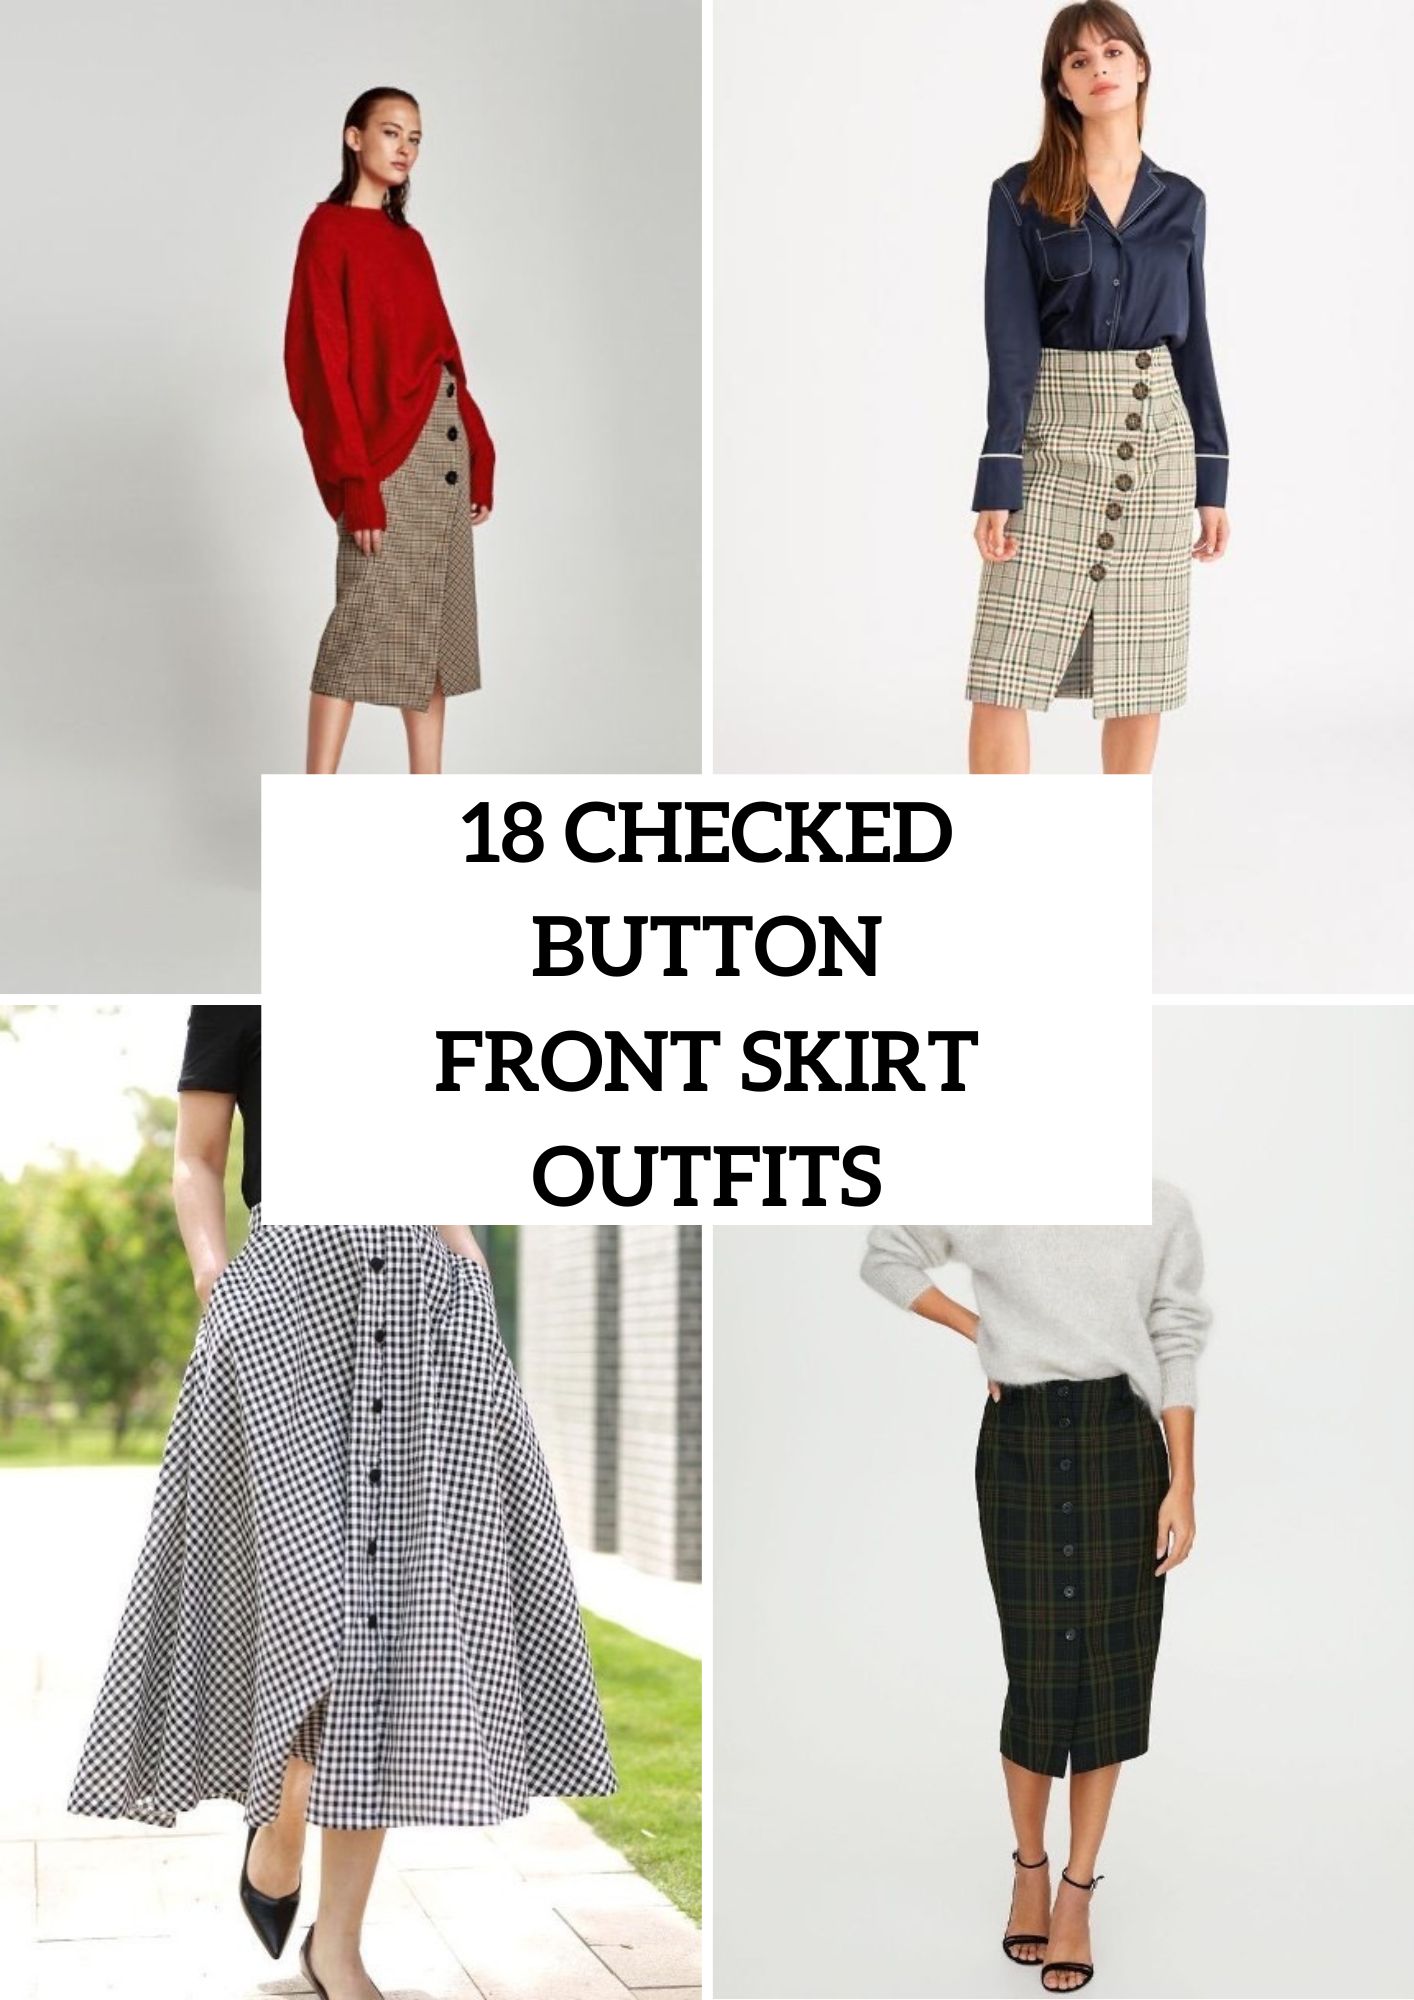 Amazing Looks With Checked Button Front Skirts